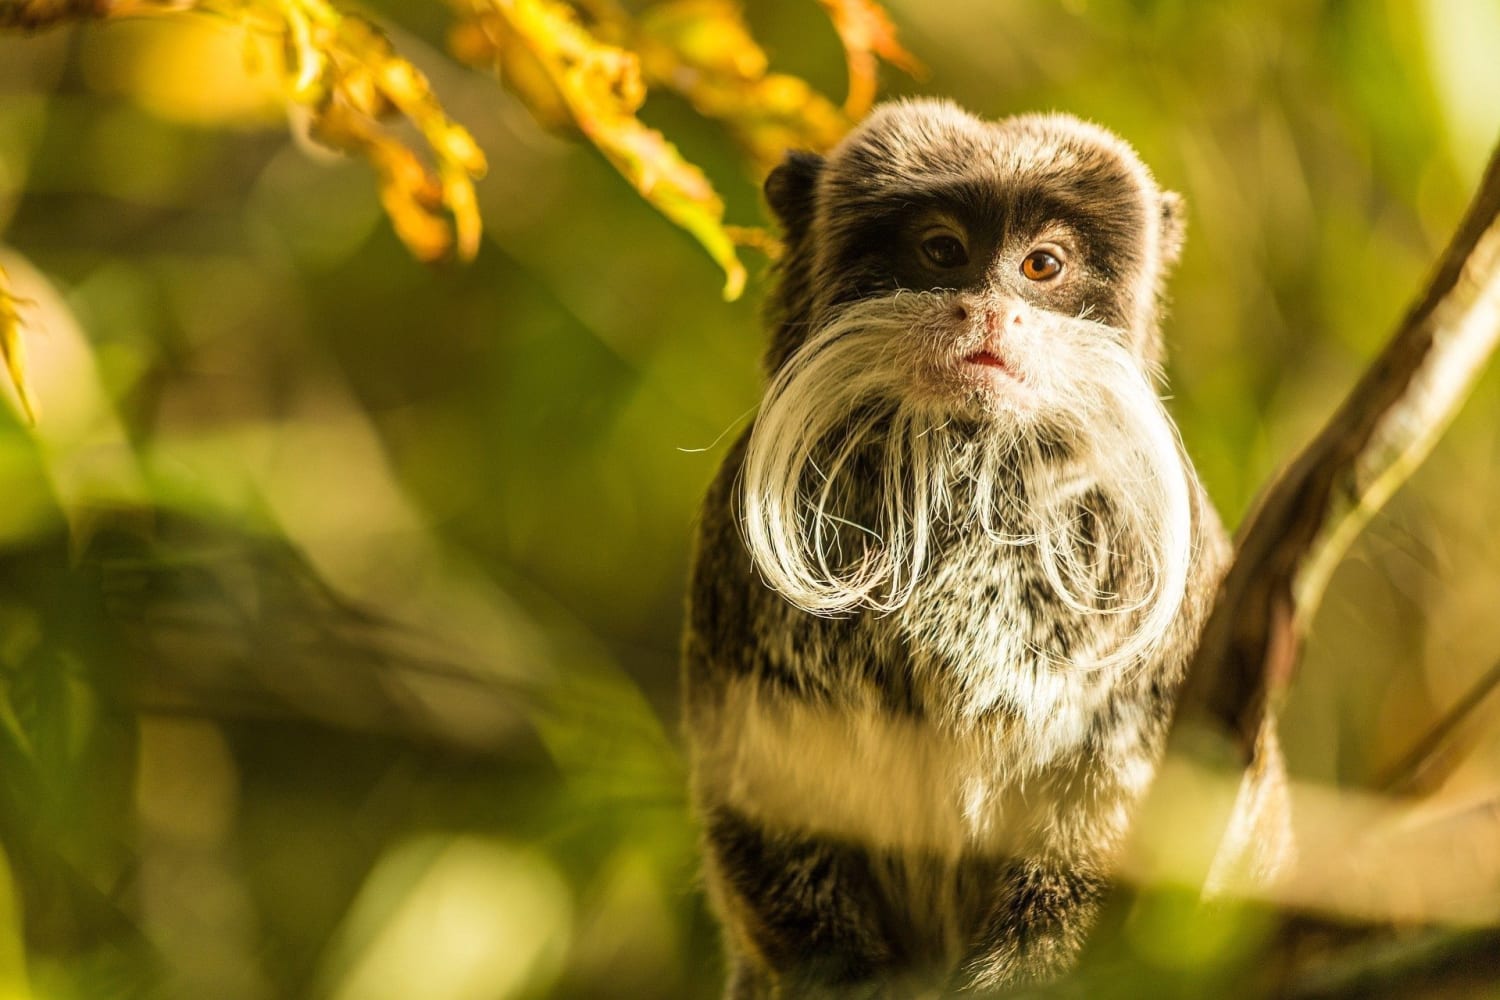 The tamarin is a small monkey of the genus Saguinus native to the New World. There are 13 members of the genus and they live in the treetops in the jungles of the Amazon basin and other parts of Central and South America. Along with their jungle habitat, most species are endangered.